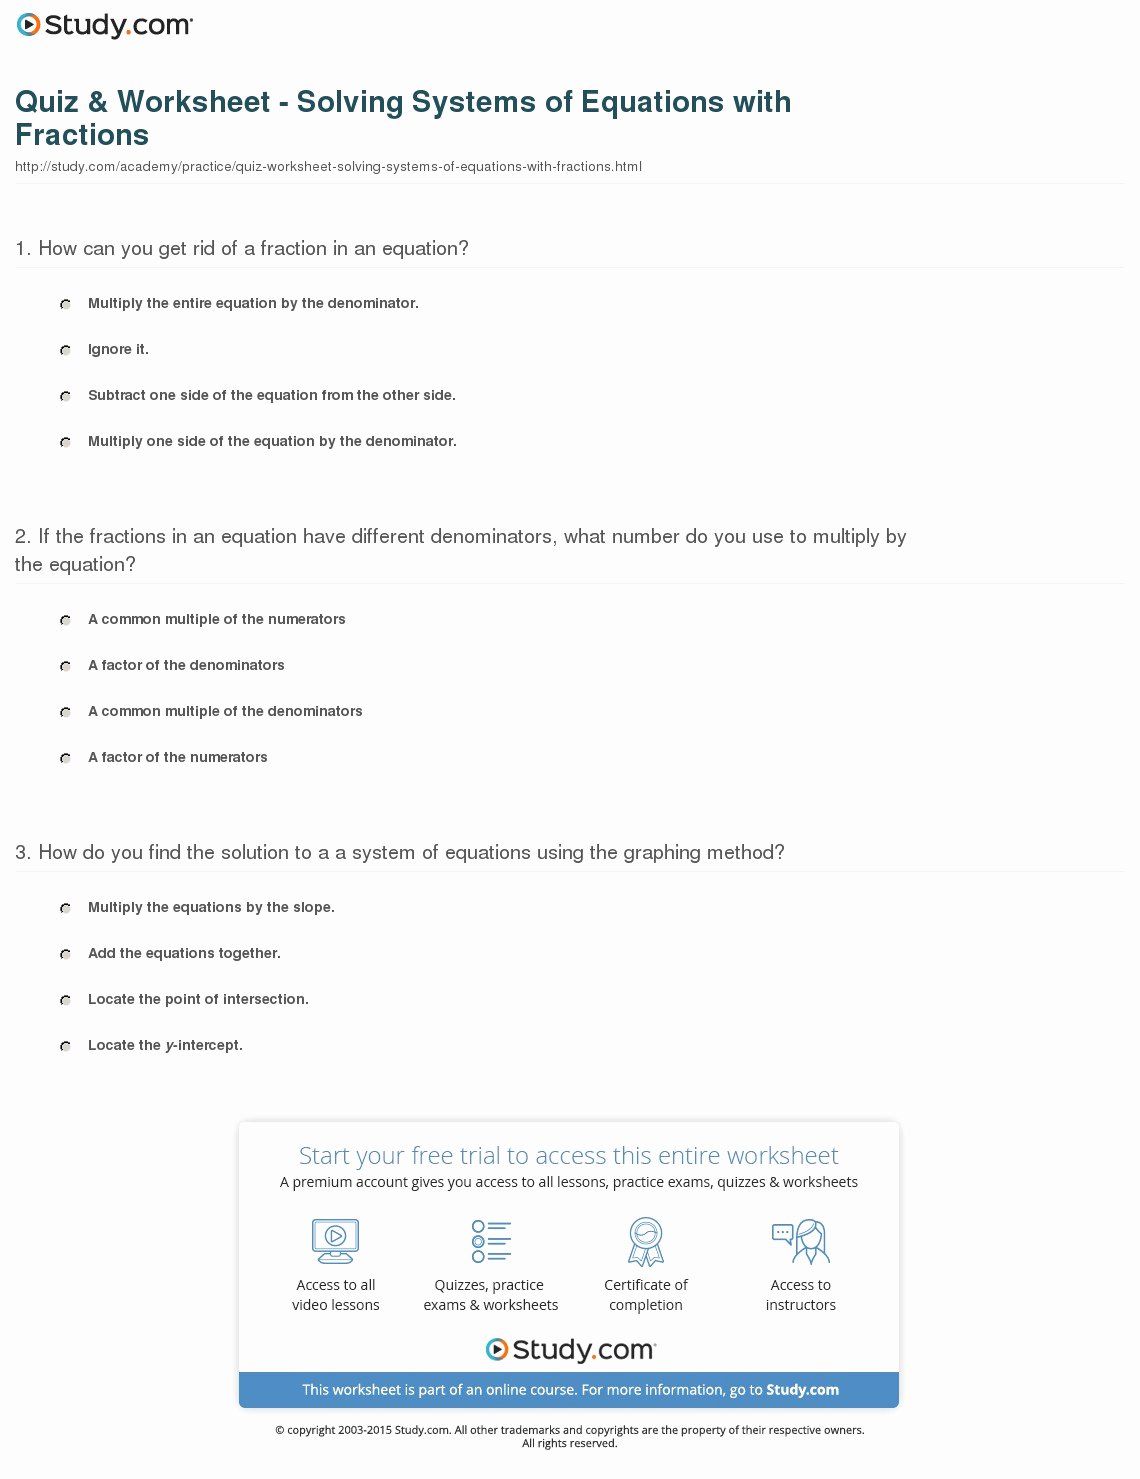 Solving Equations with Fractions Worksheet Beautiful Quiz & Worksheet solving Systems Of Equations with